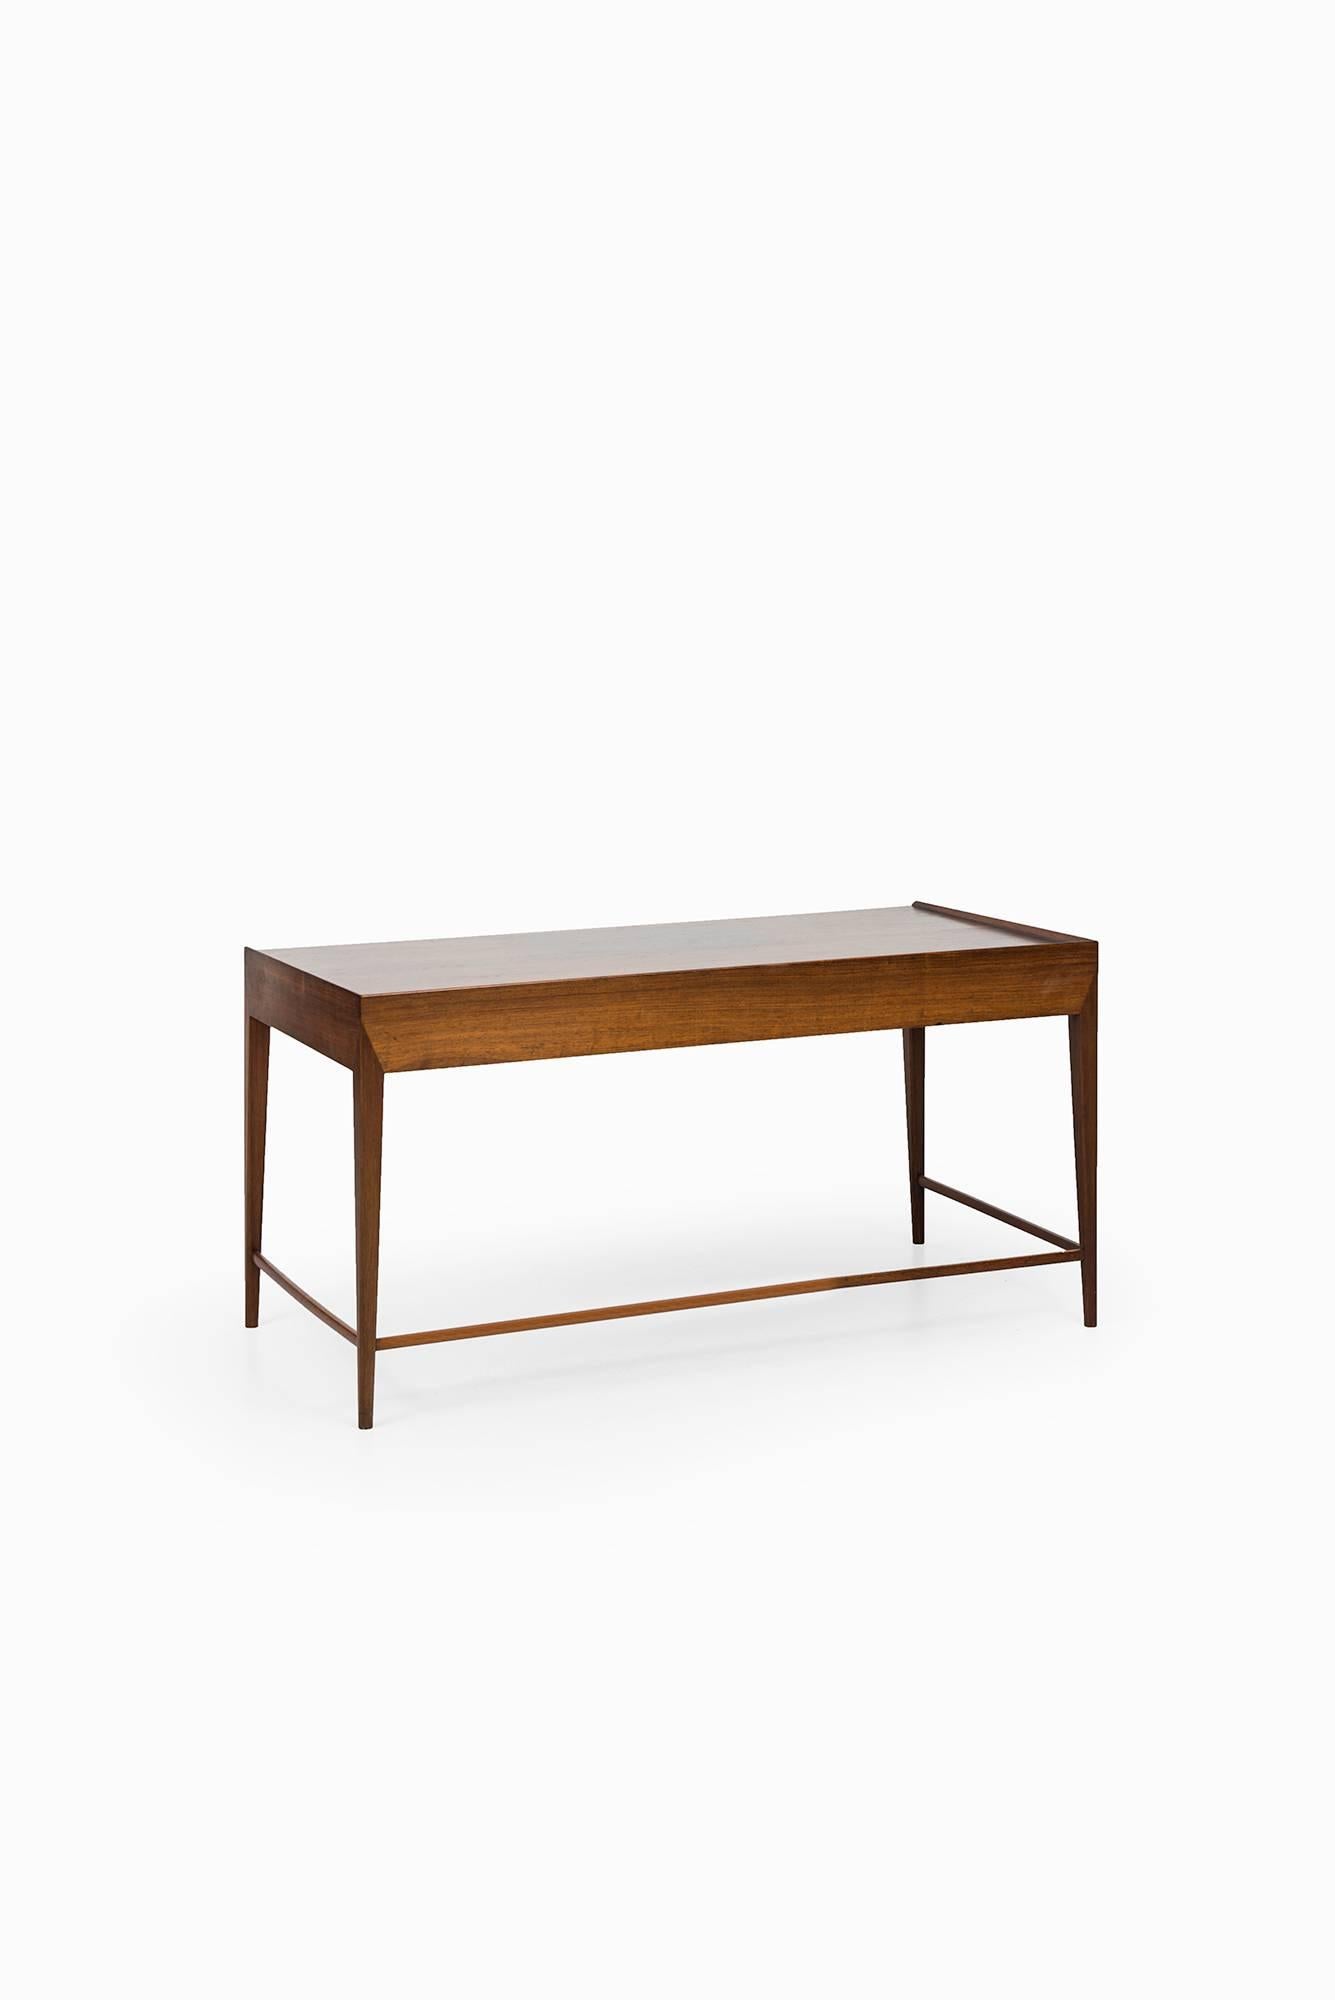 Rosewood Frode Holm desk in rosewood by Illums Bolighus in Denmark